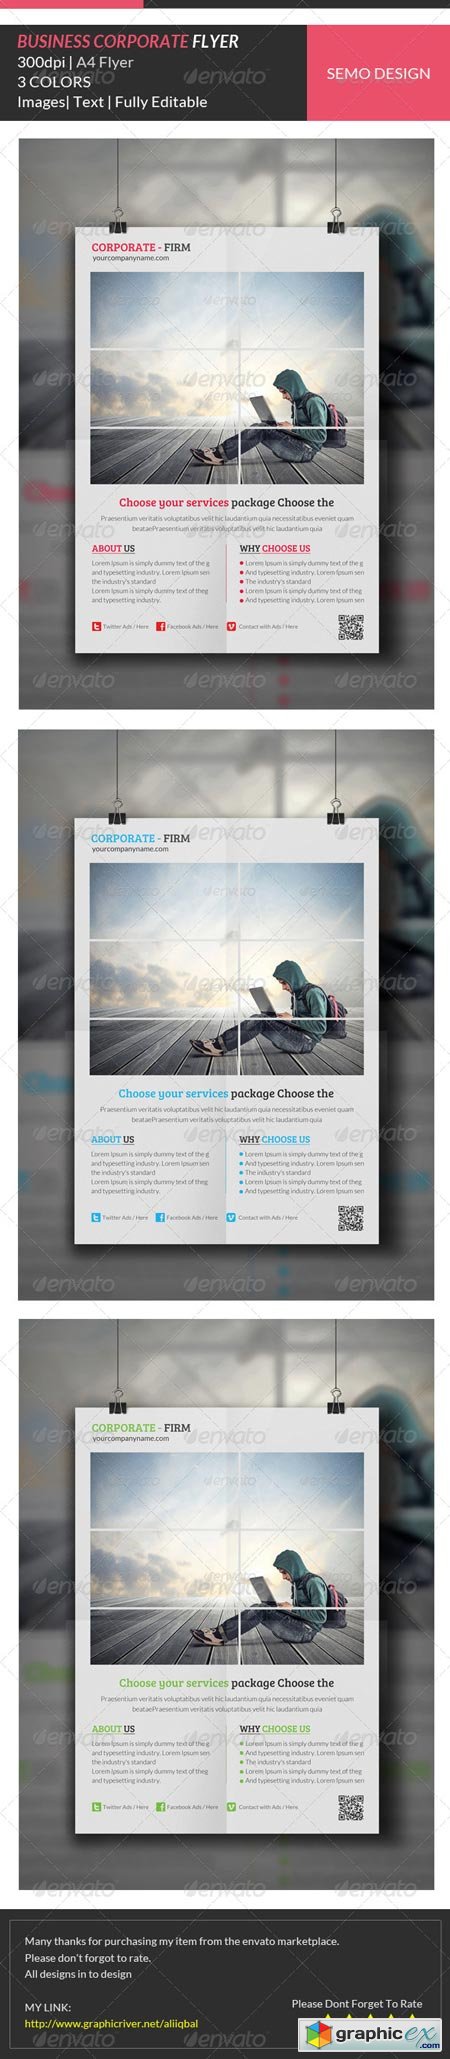 Business Corporate Flyer Template 6913578